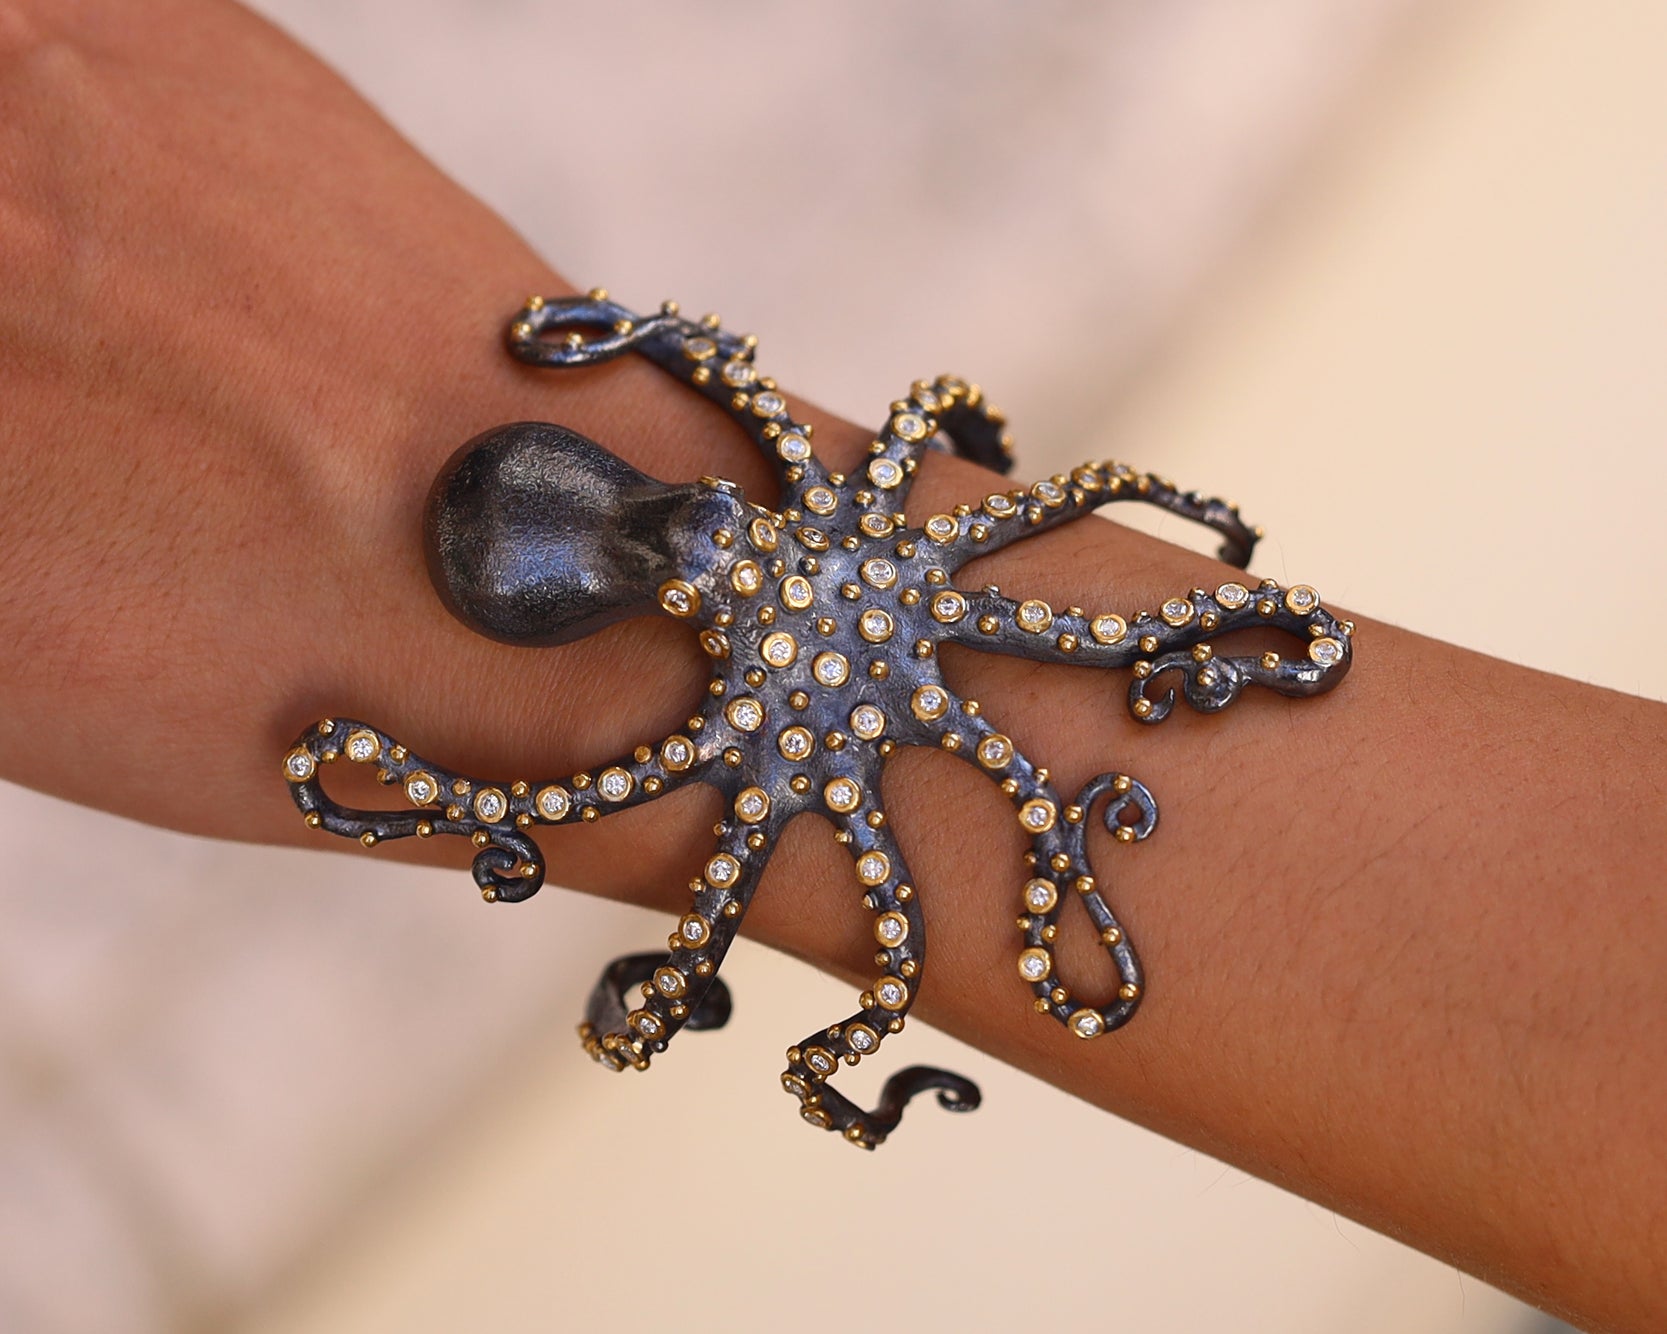 Diamond Encrusted Octopus Cuff Bracelet 24k Gold And Oxidized Silver